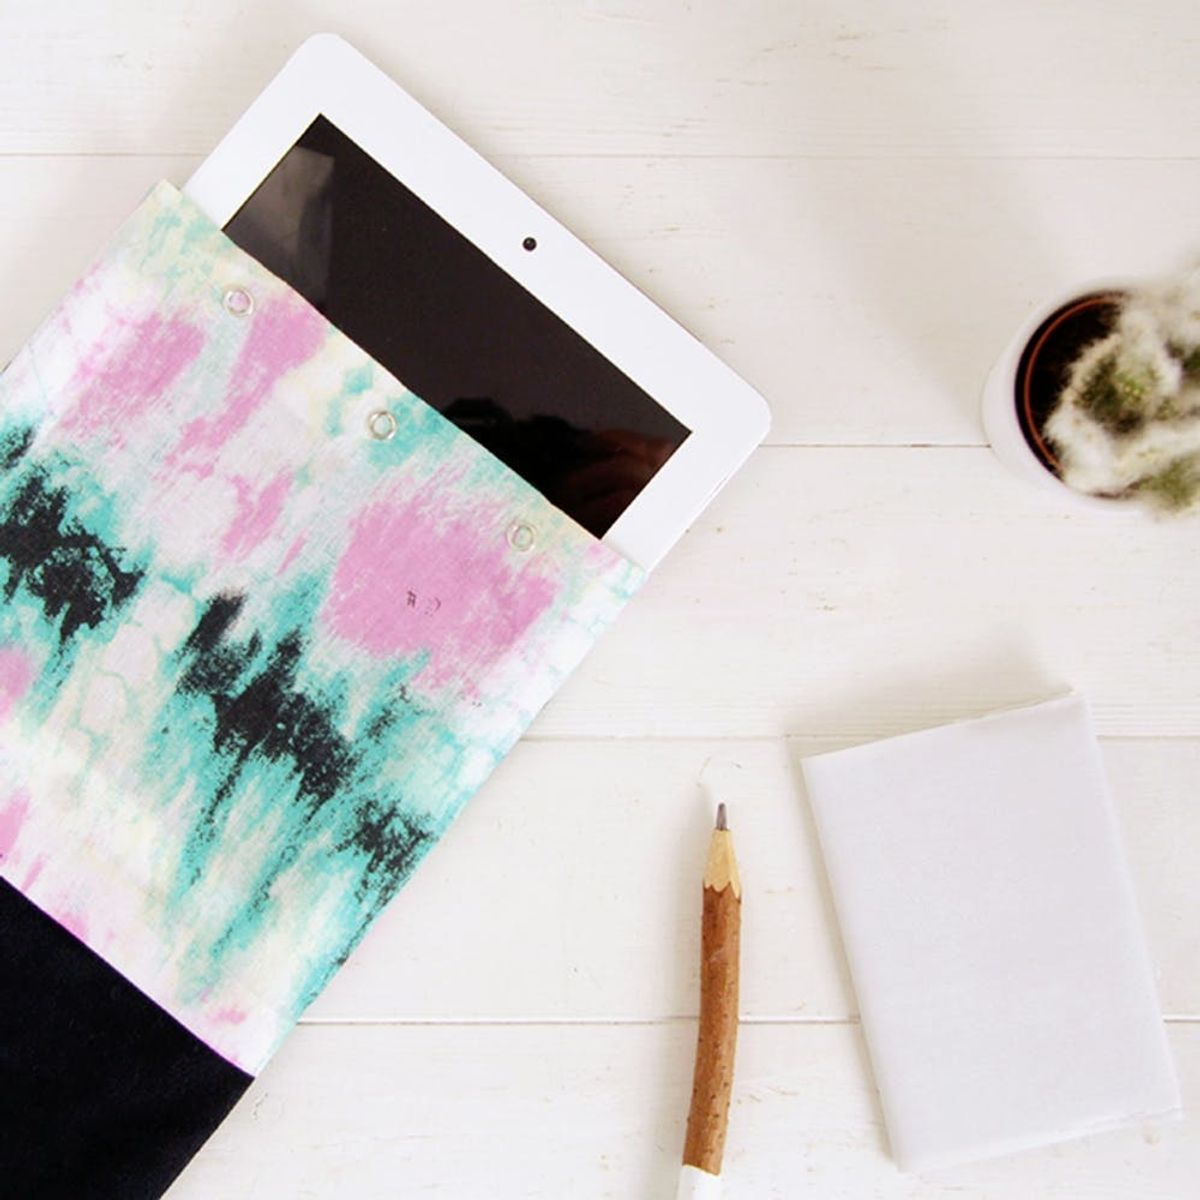 16 Ways to Cover + Protect Your iPad or Kindle